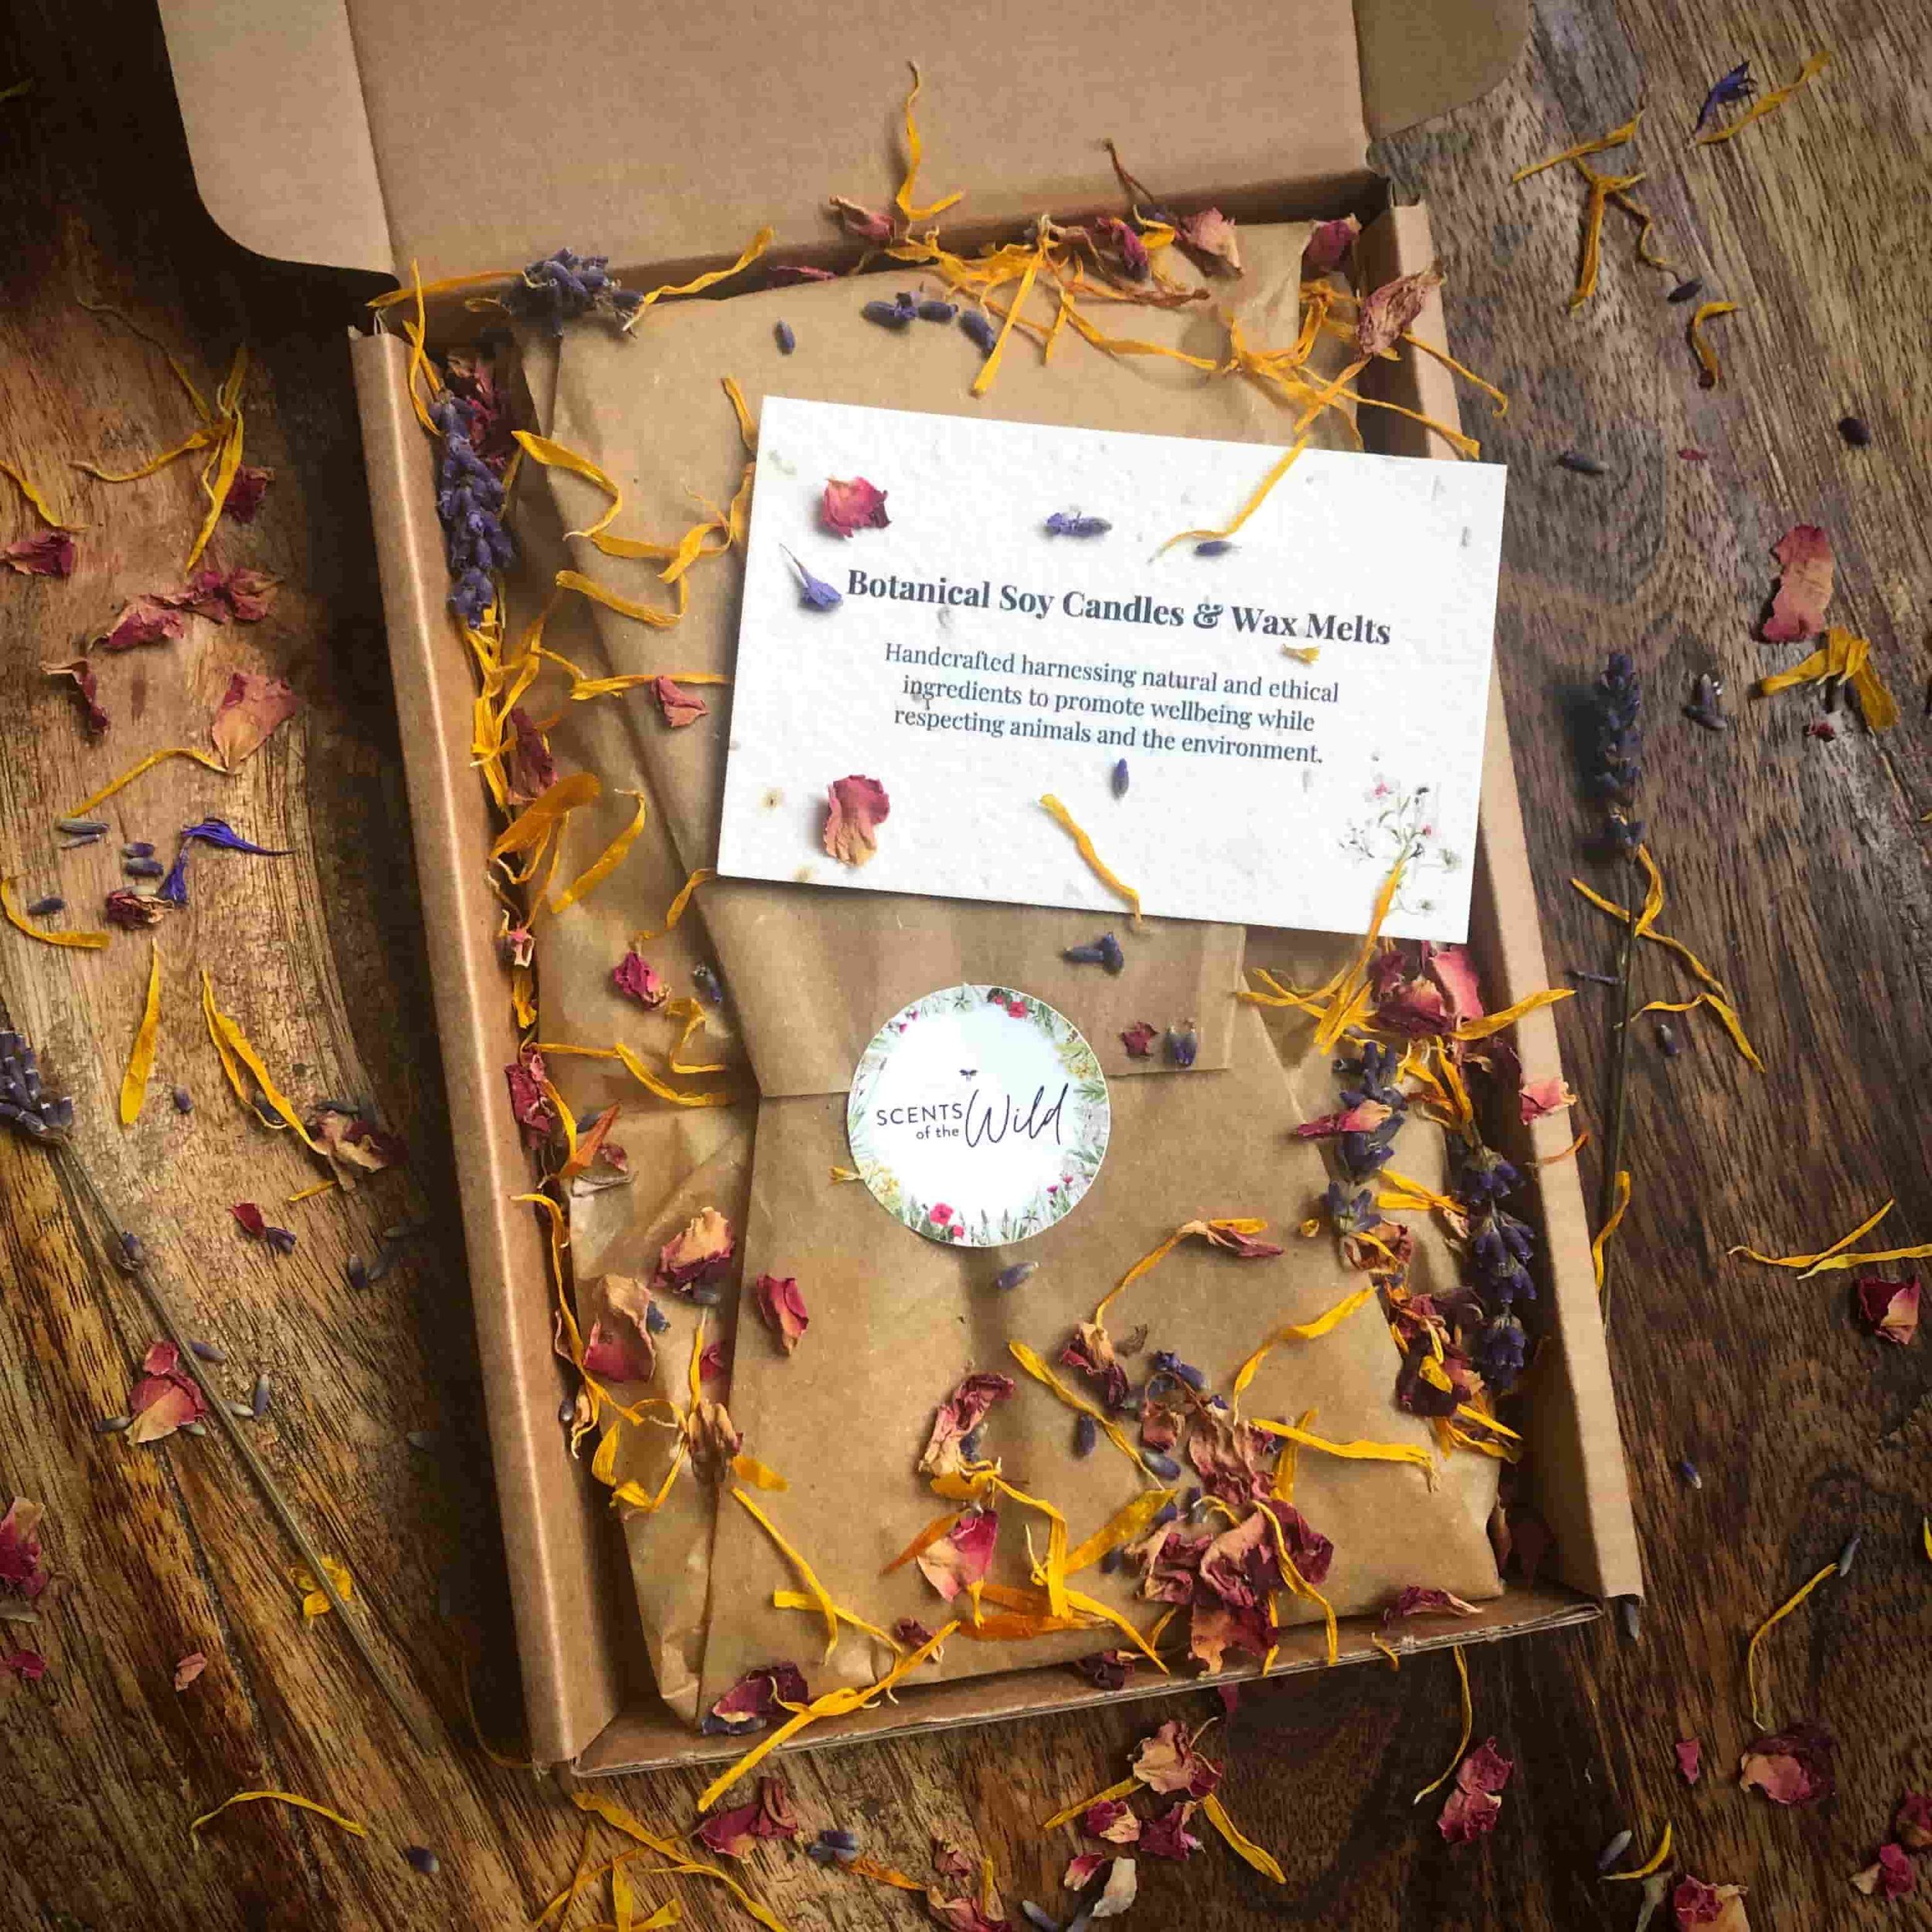 Eco wrapped soy wax melt gift set box scattered with colourful dried botanicals.jpg